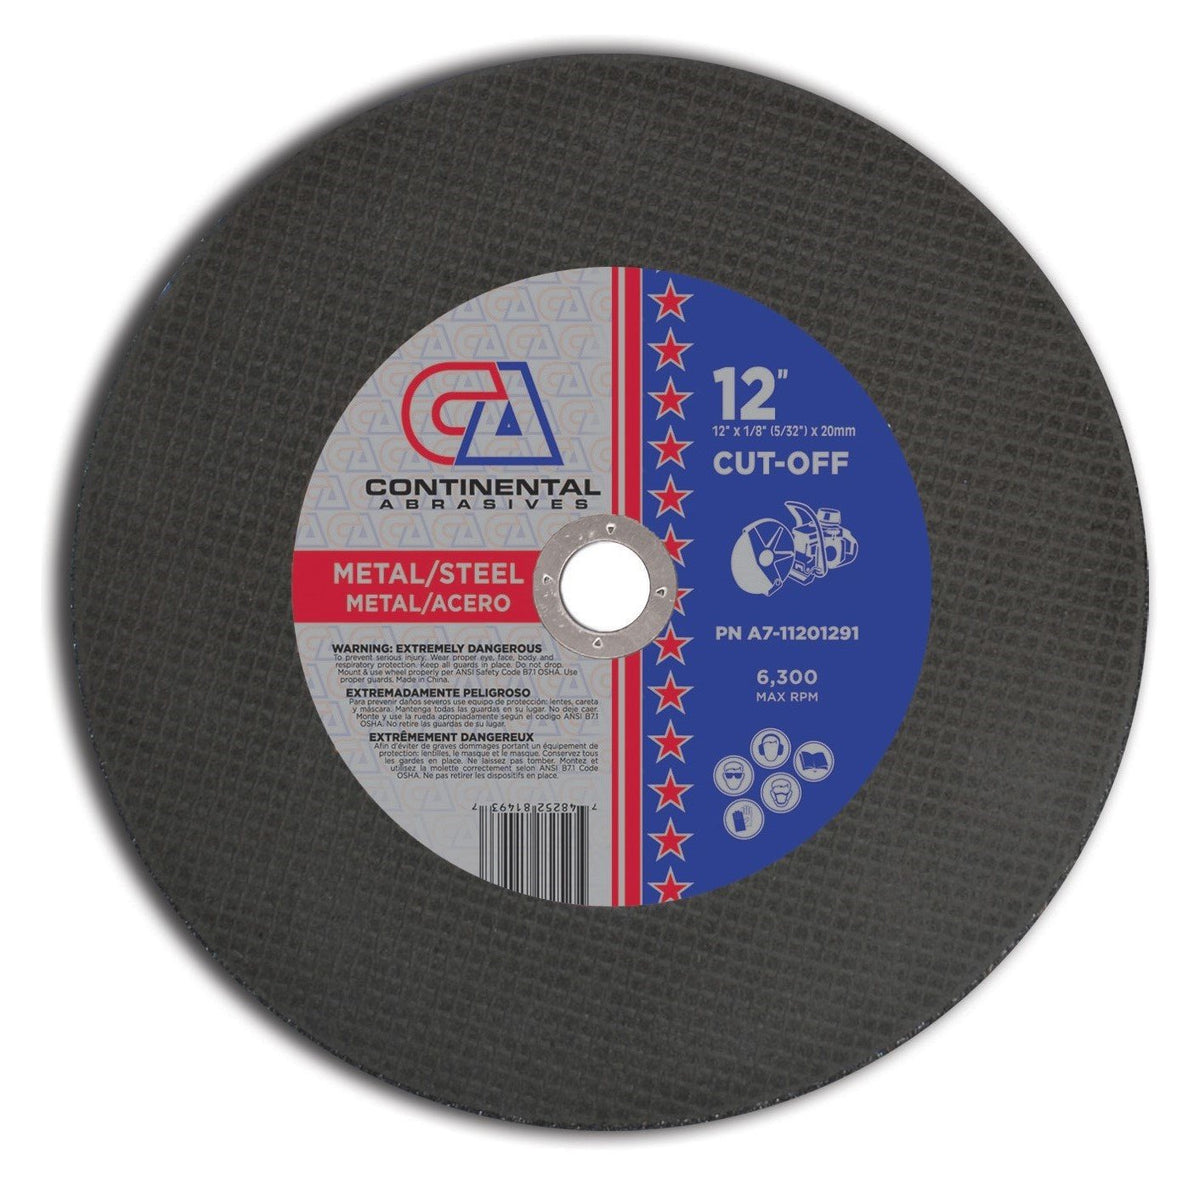 12" x 1/8" (5/32") x 20mm Type 1 Gas Saw Wheels for Metal/Steel (Pack of 10)